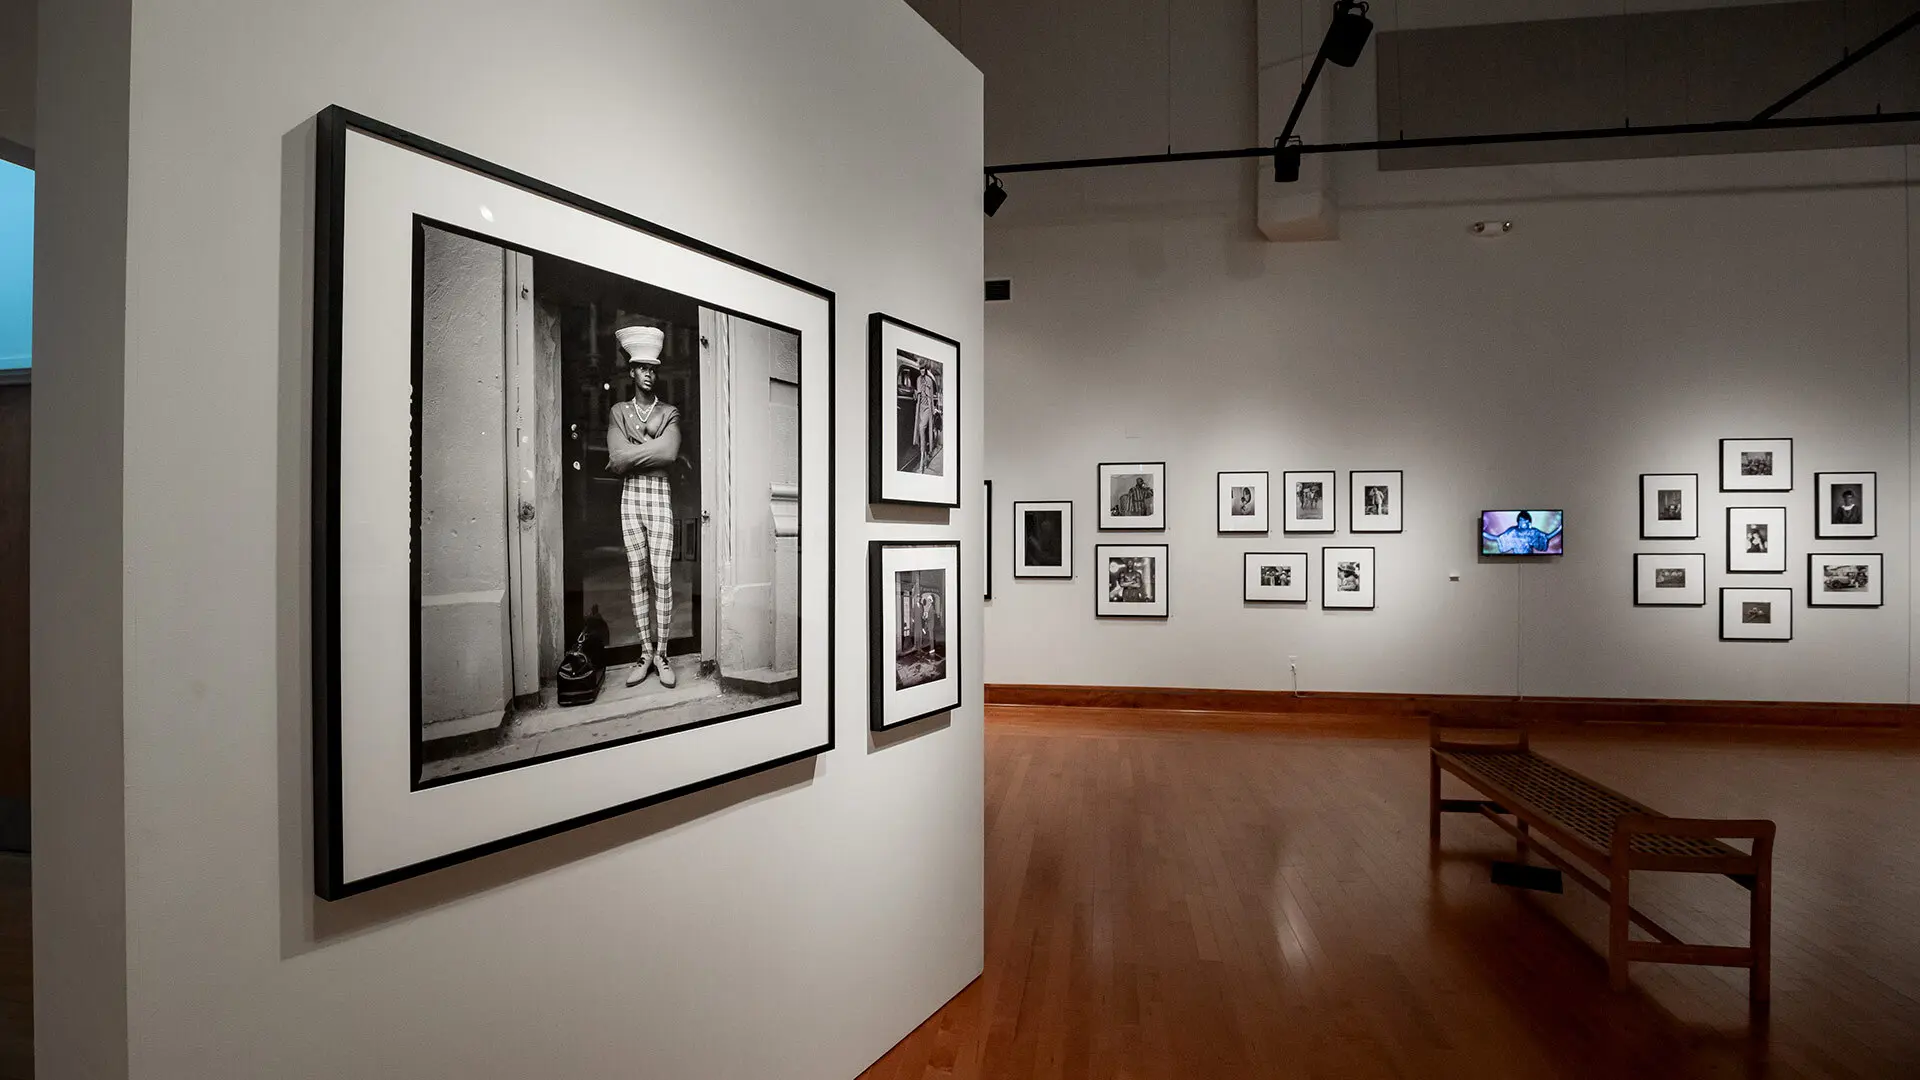 An installation image from Posing Beauty at the Driskell Center